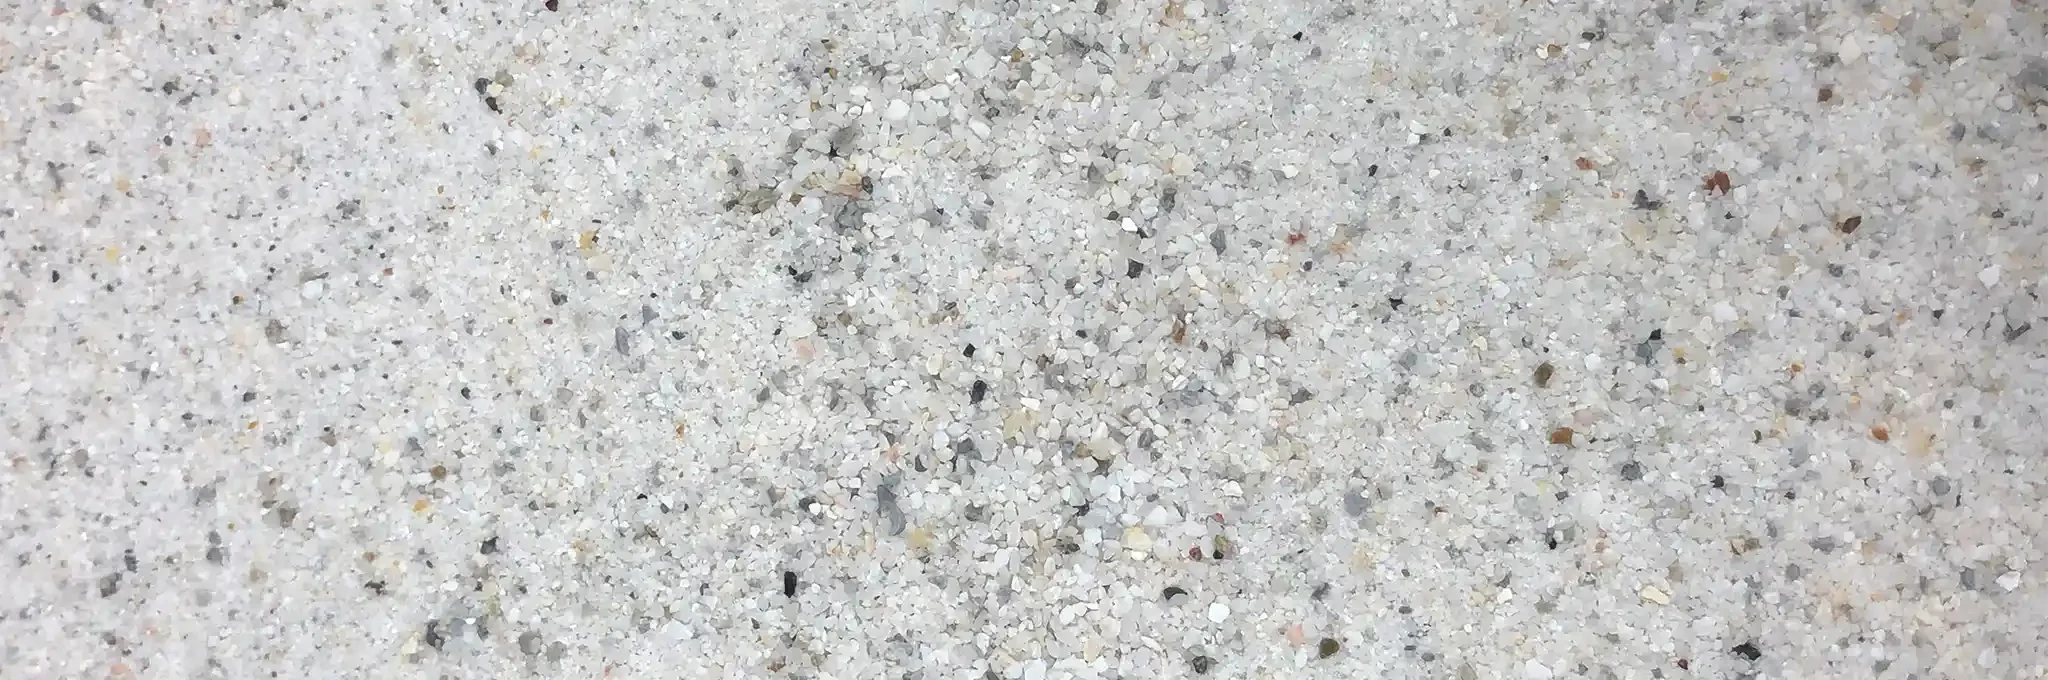 A close-up view of Premier White sand.